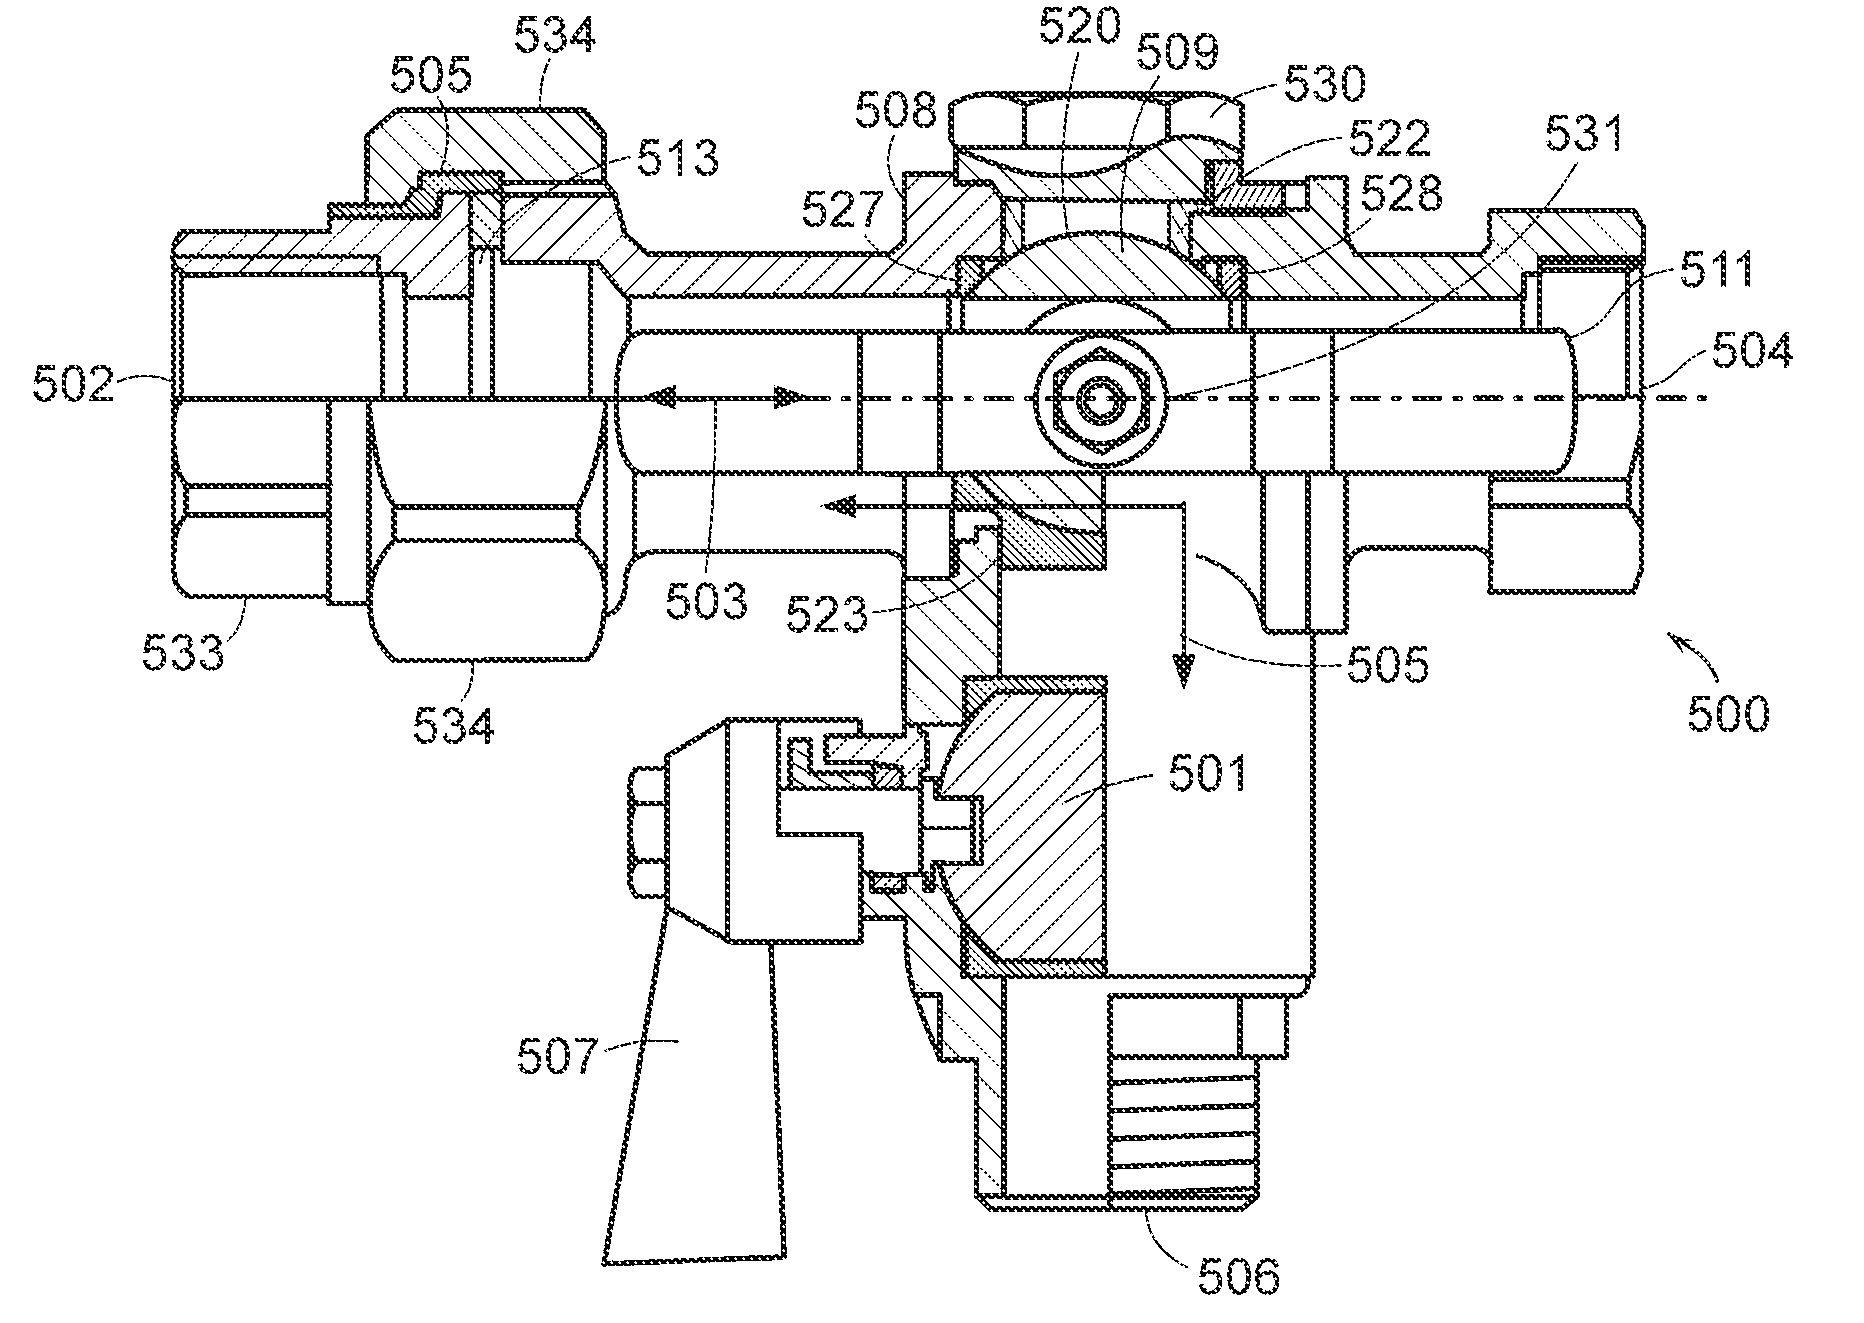 System for controlling fluid flow to an appliance